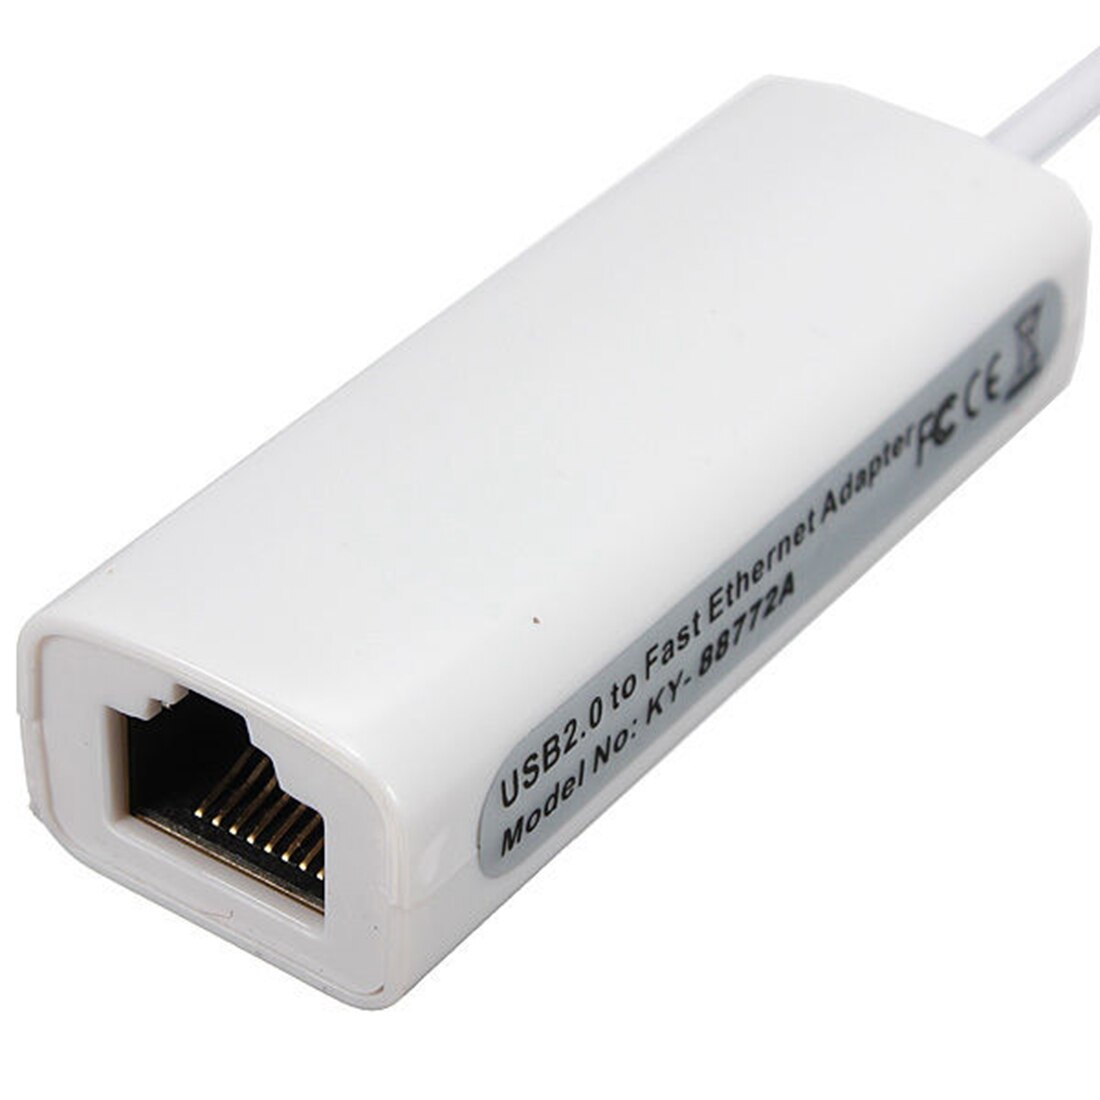 Top Deals USB 2.0 to RJ45 LAN Ethernet Network Adapter For Apple Mac MacBook Air Laptop PC